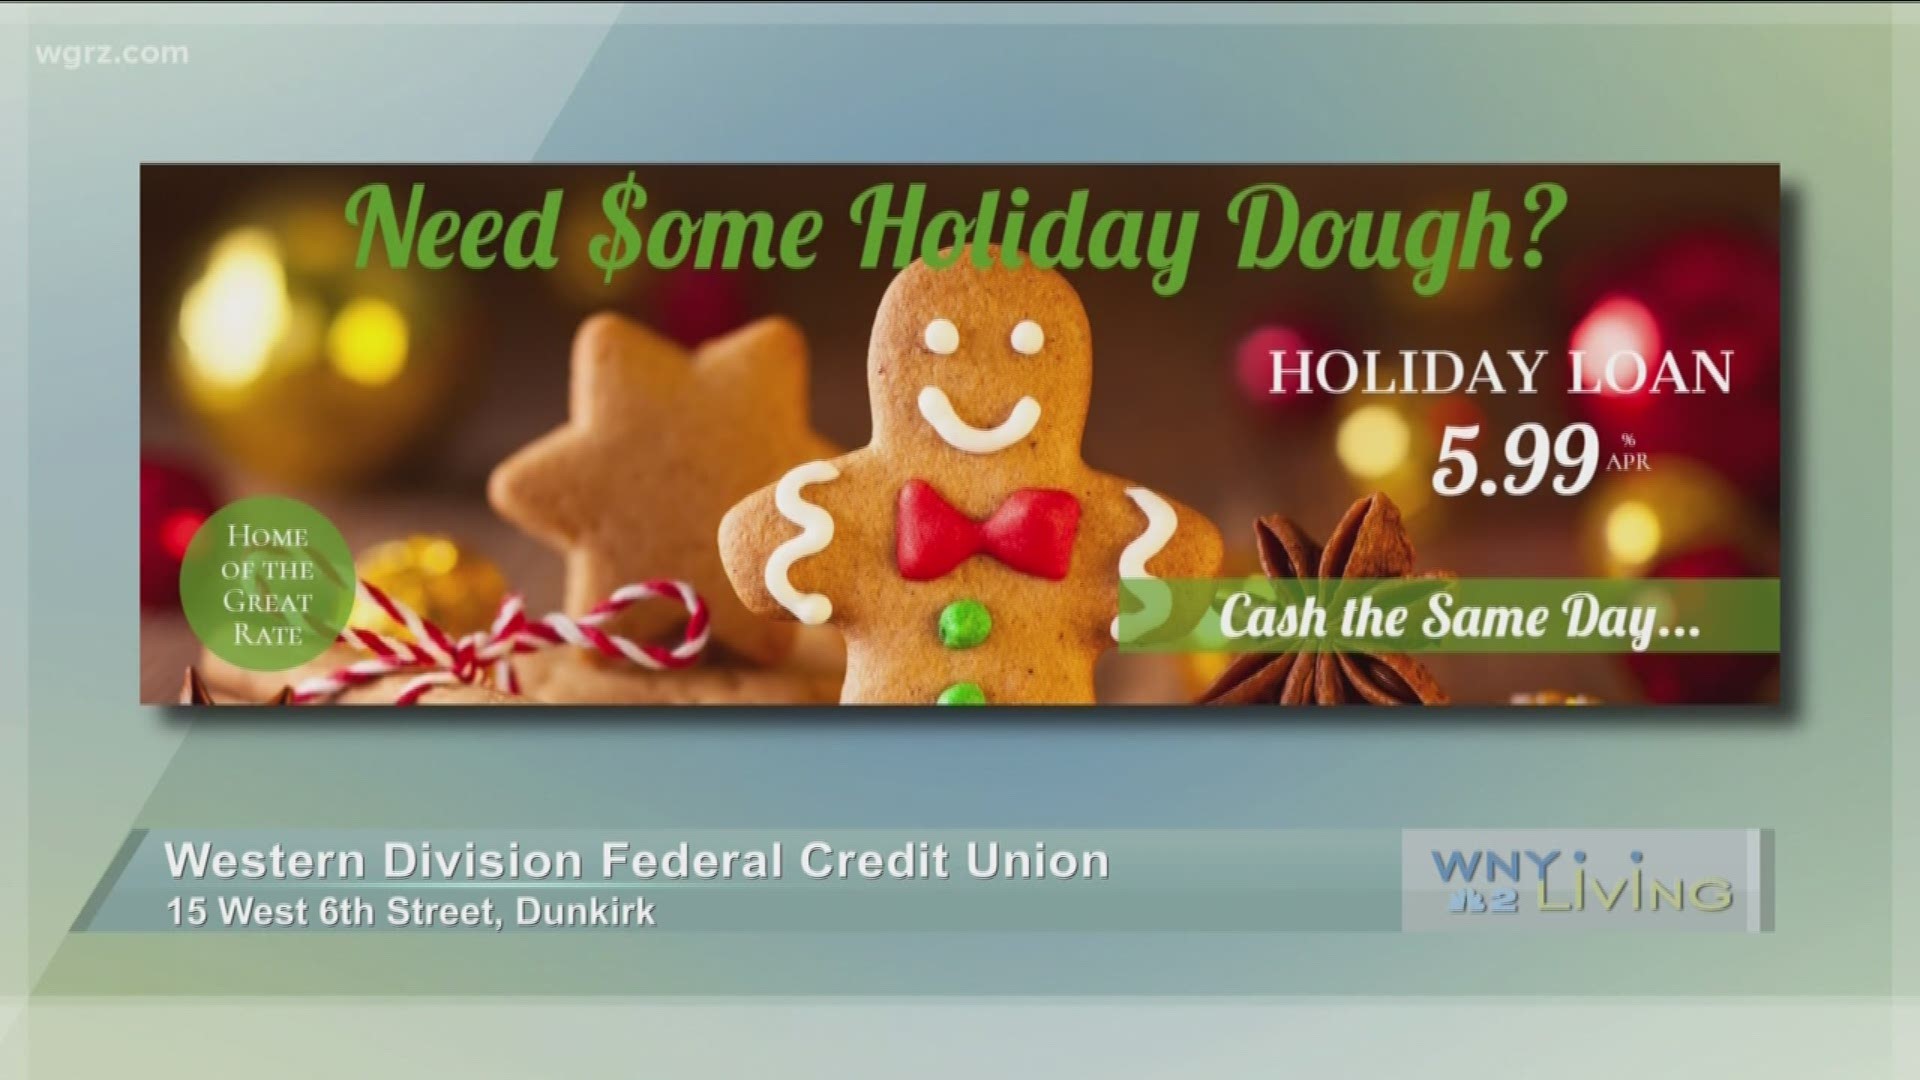 WNY Living - November 12 - WECK Western Division Federal Credit Union